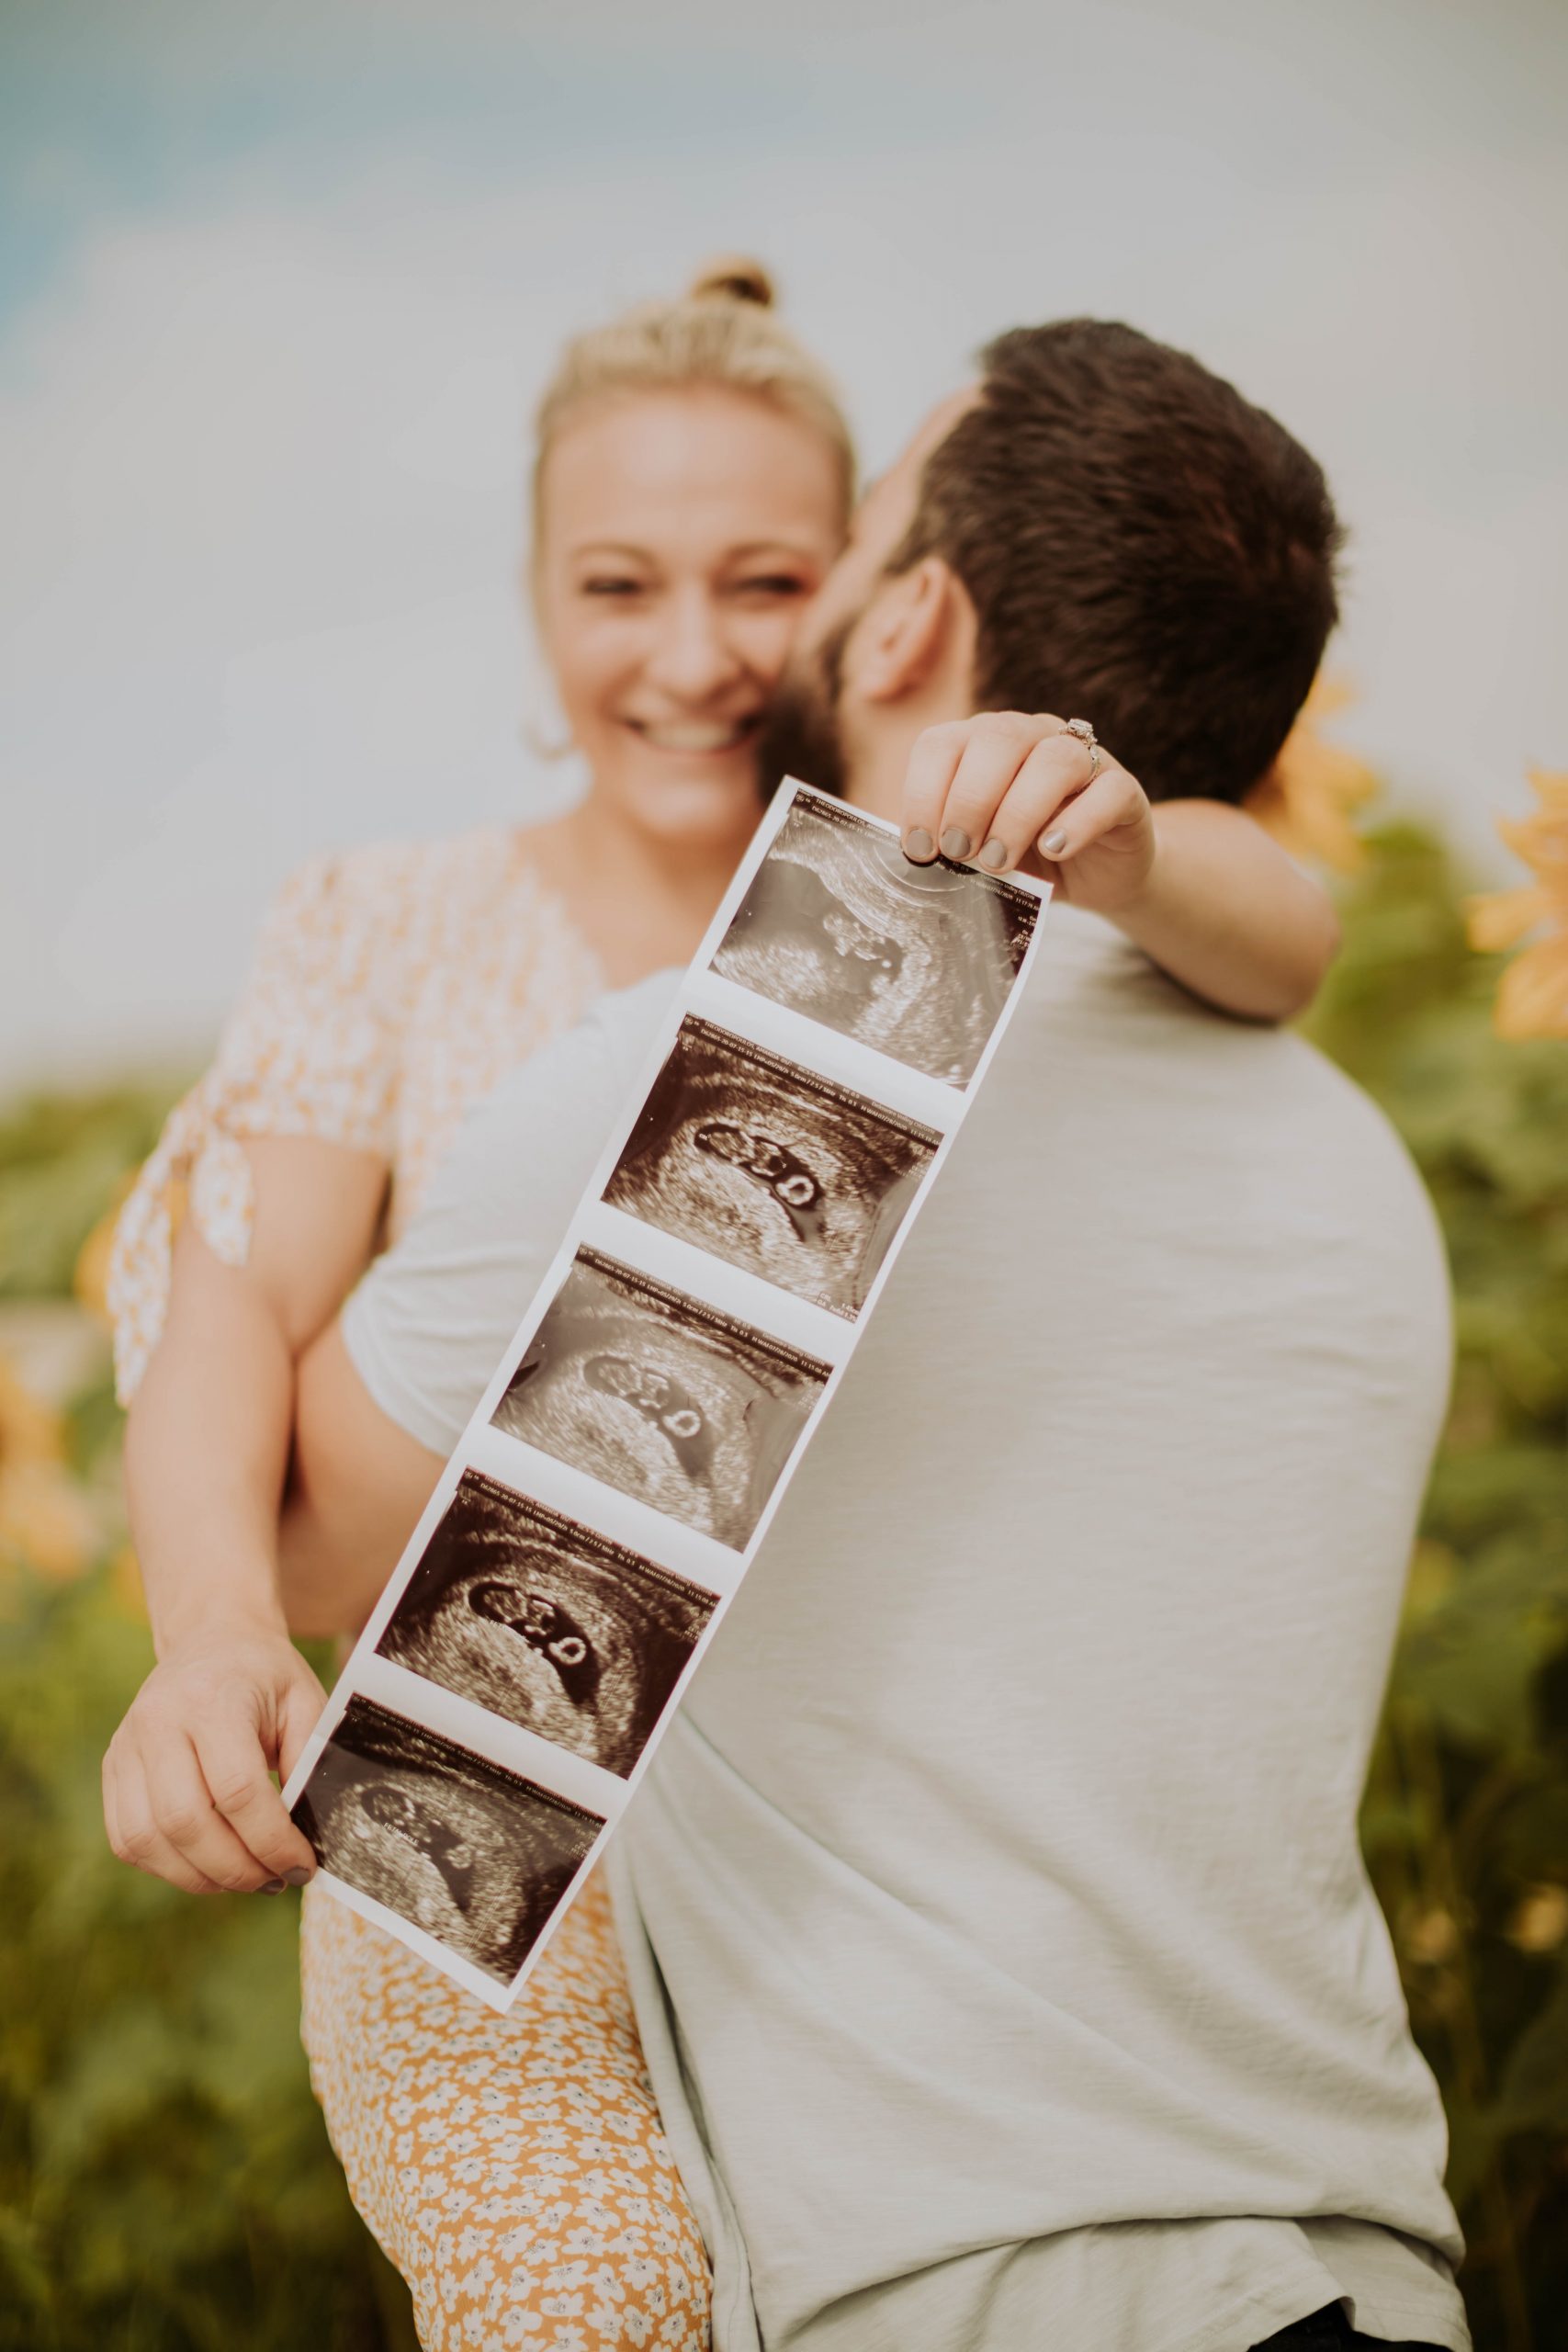 A couple embraced in a loving hug with the woman holding a photo montage of her sonogram